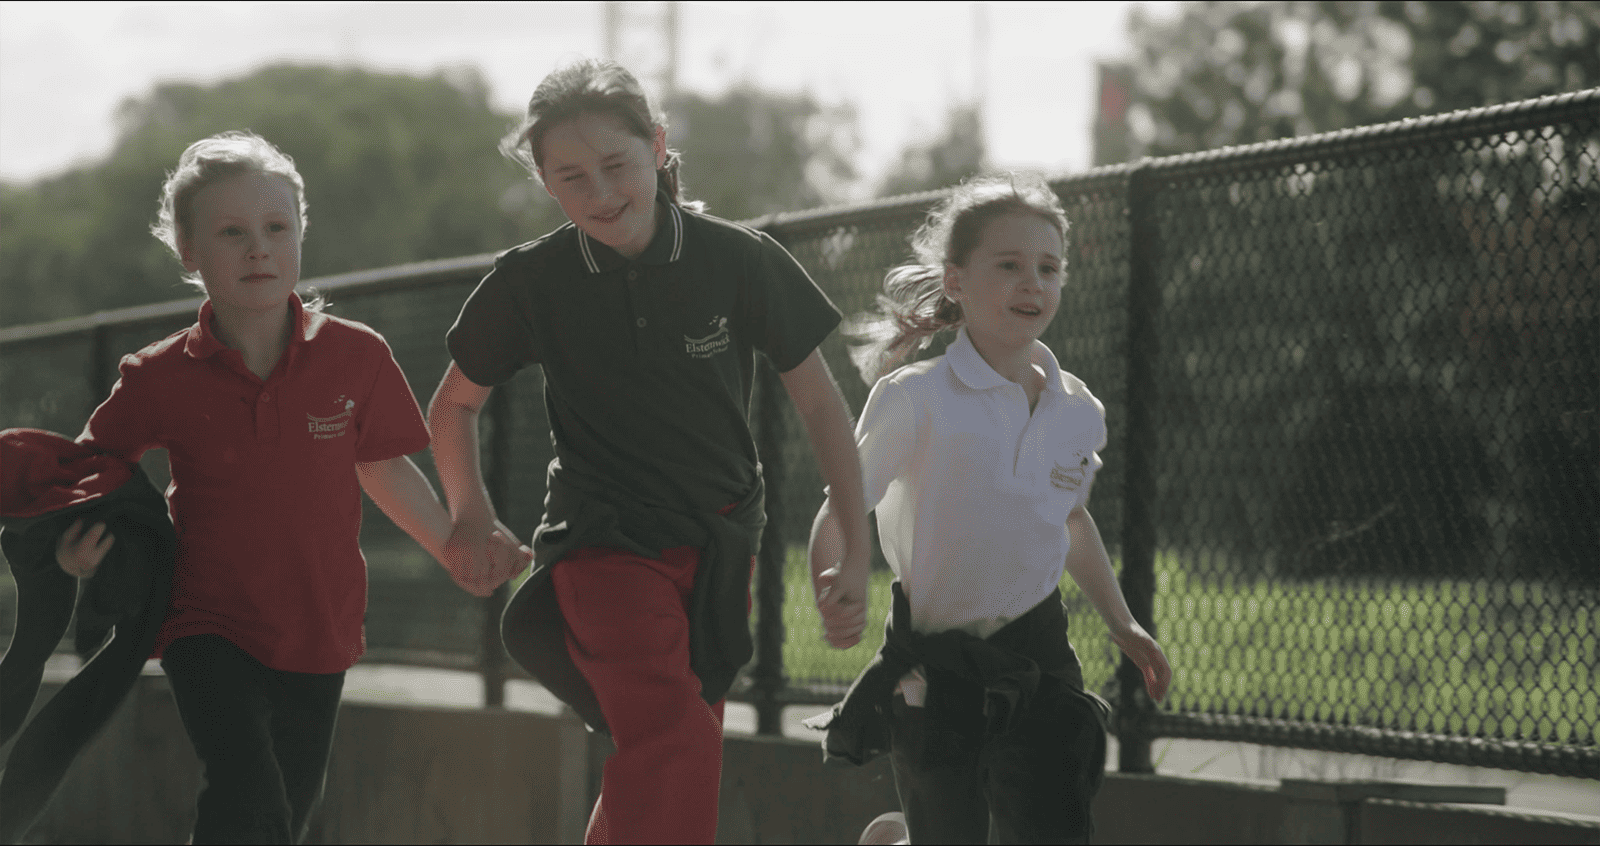 Three young girls running past a fence.